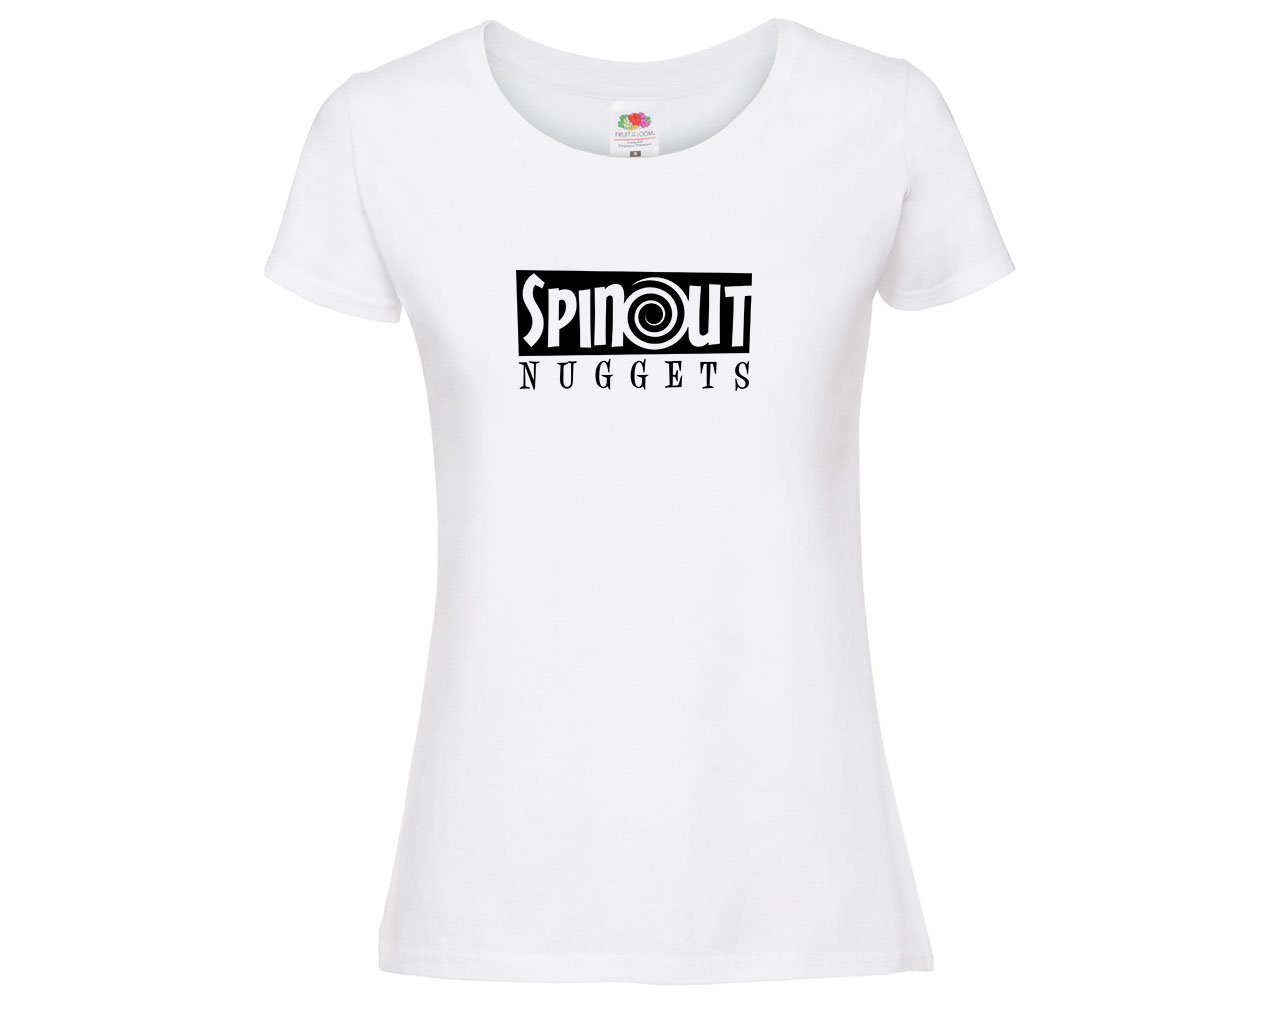 Spinout Nuggets Ladies Ring Spun Premium Tee - Large - Spinout Productions